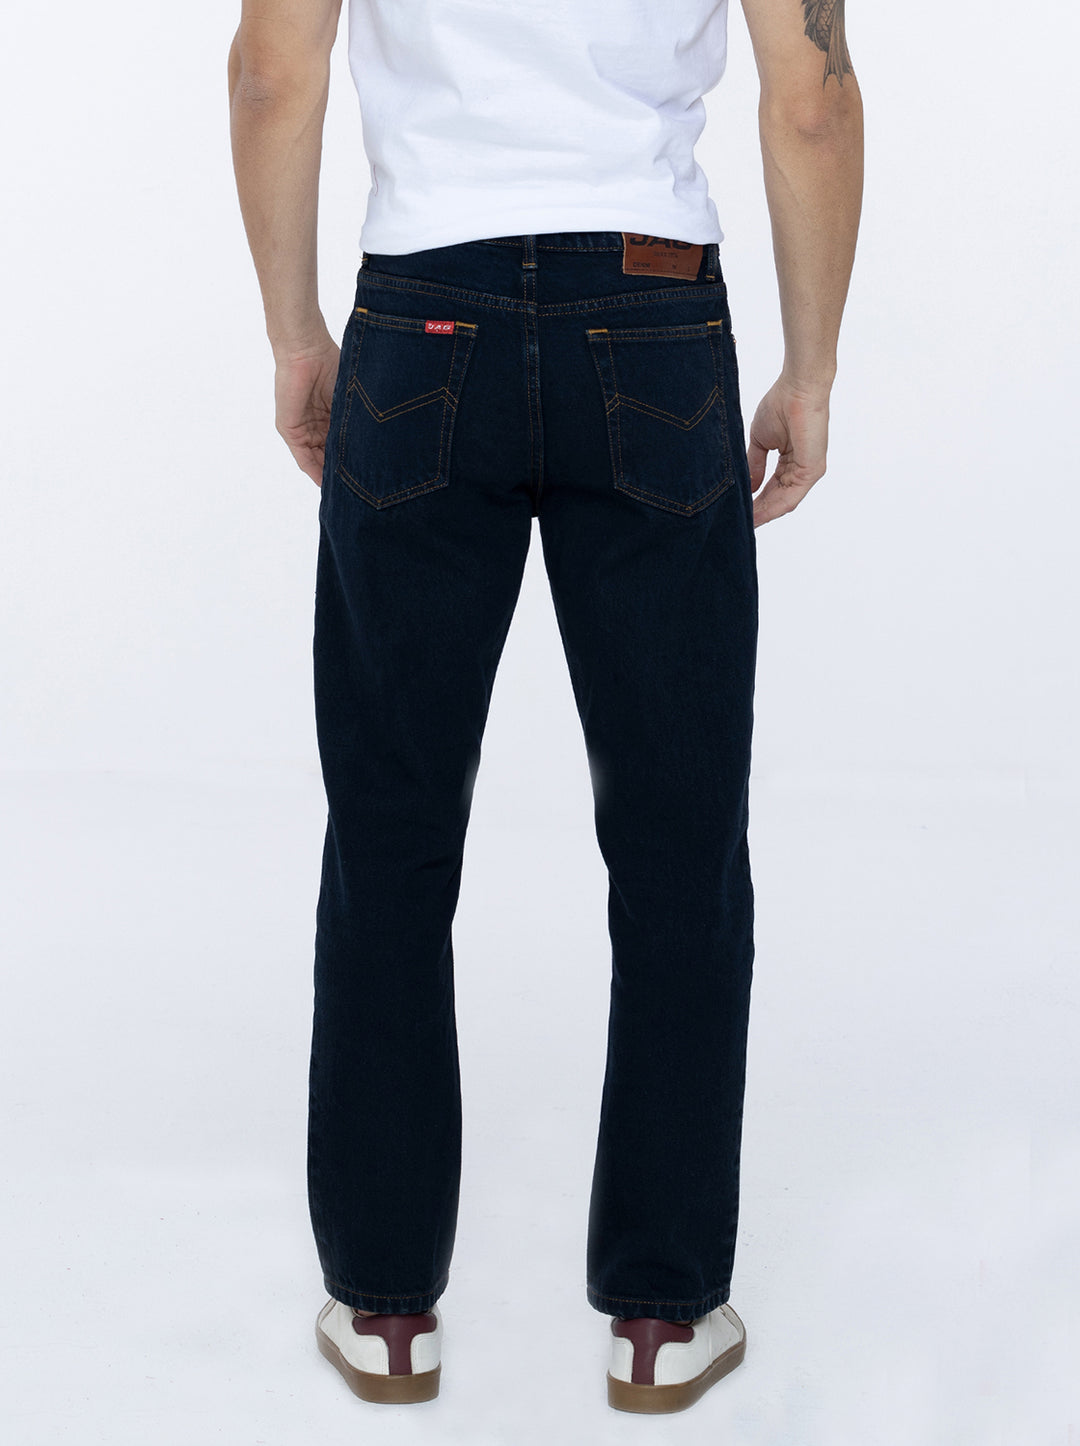 Jag Men's Straight Cut Jeans in Charcoal Blue